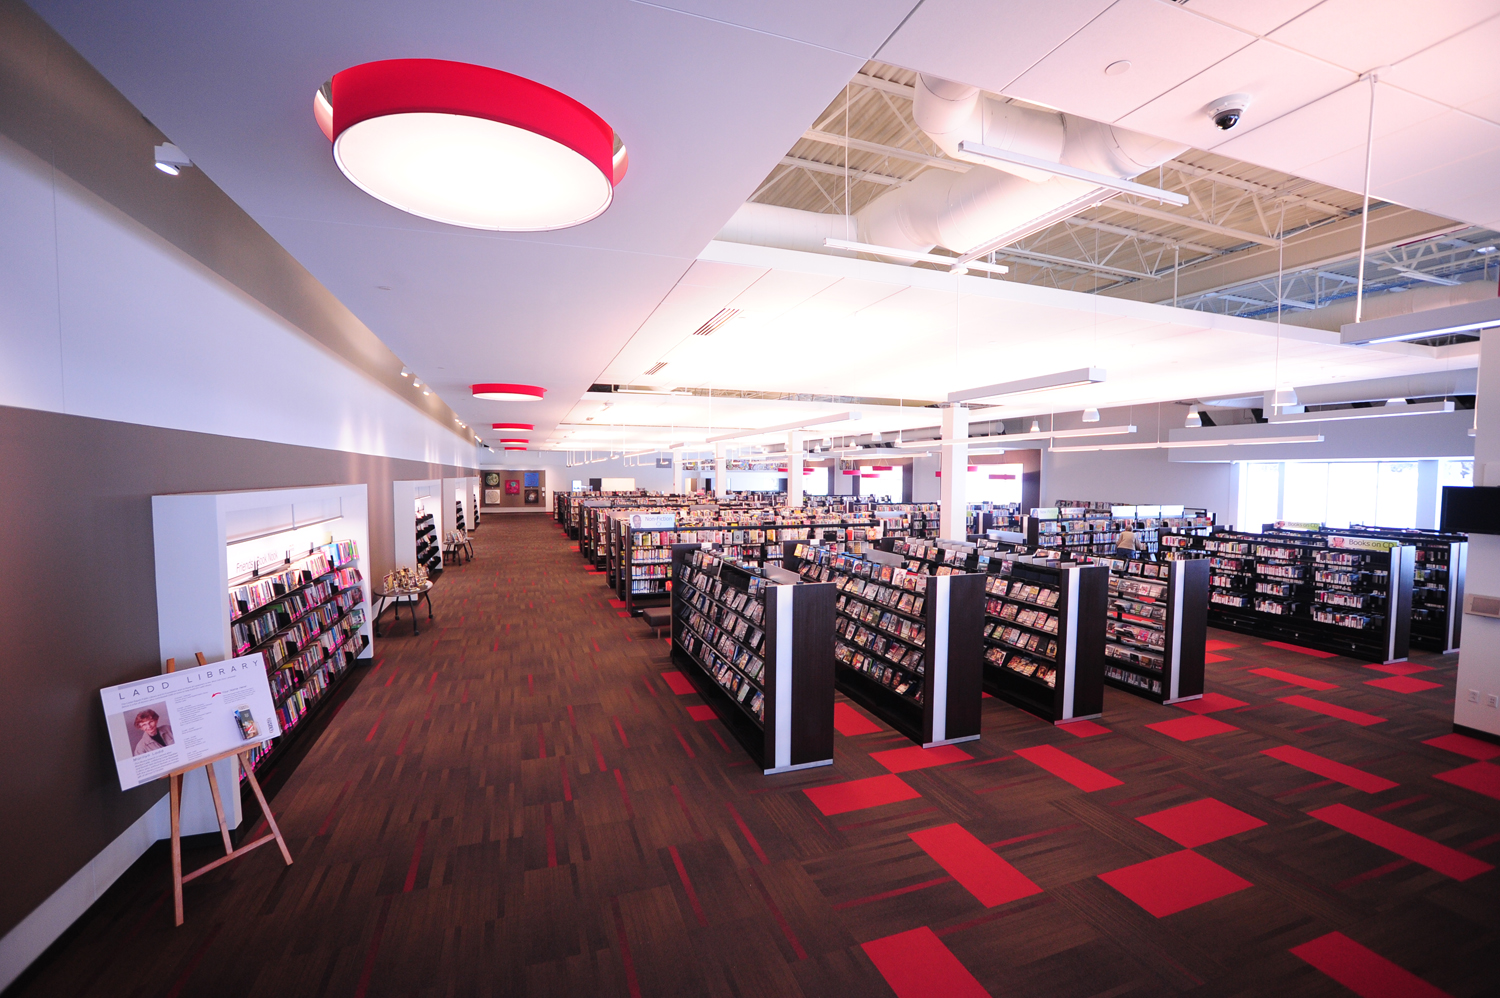 A red light fixture shines on rows of book shelves.